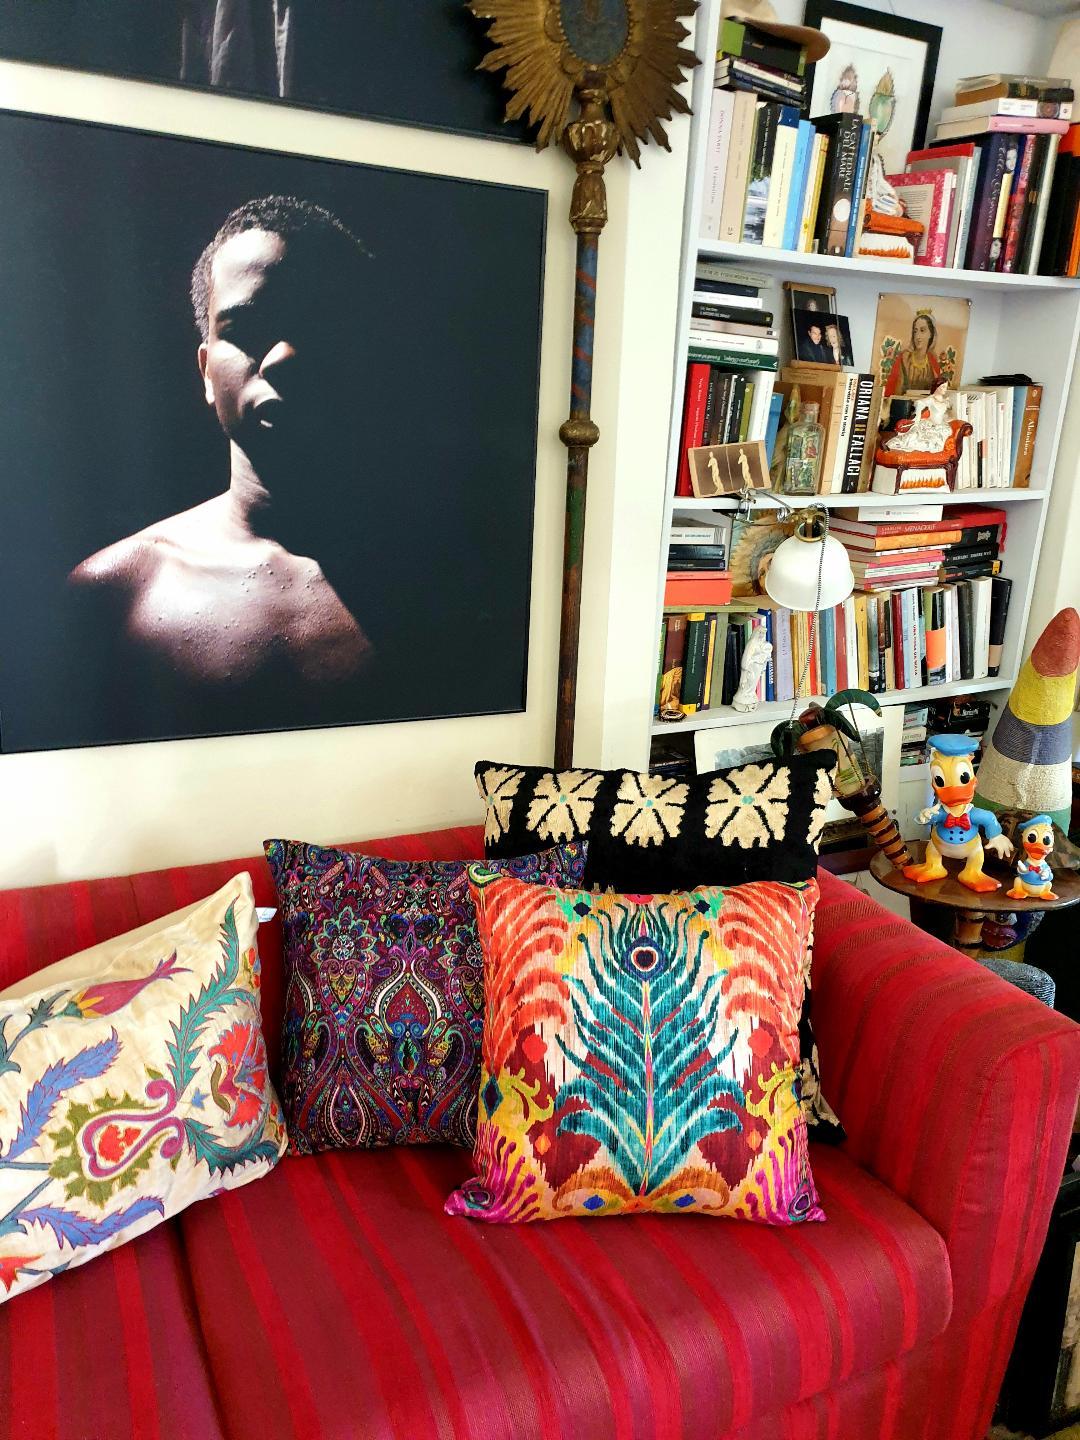 Matthew Williamson one of the most well known fashion designer has created a tabletop and textile collection for les-Ottomans. Colors is a must in all Williamsons’ designs as well as the peacock’s references that are here declinated in several new